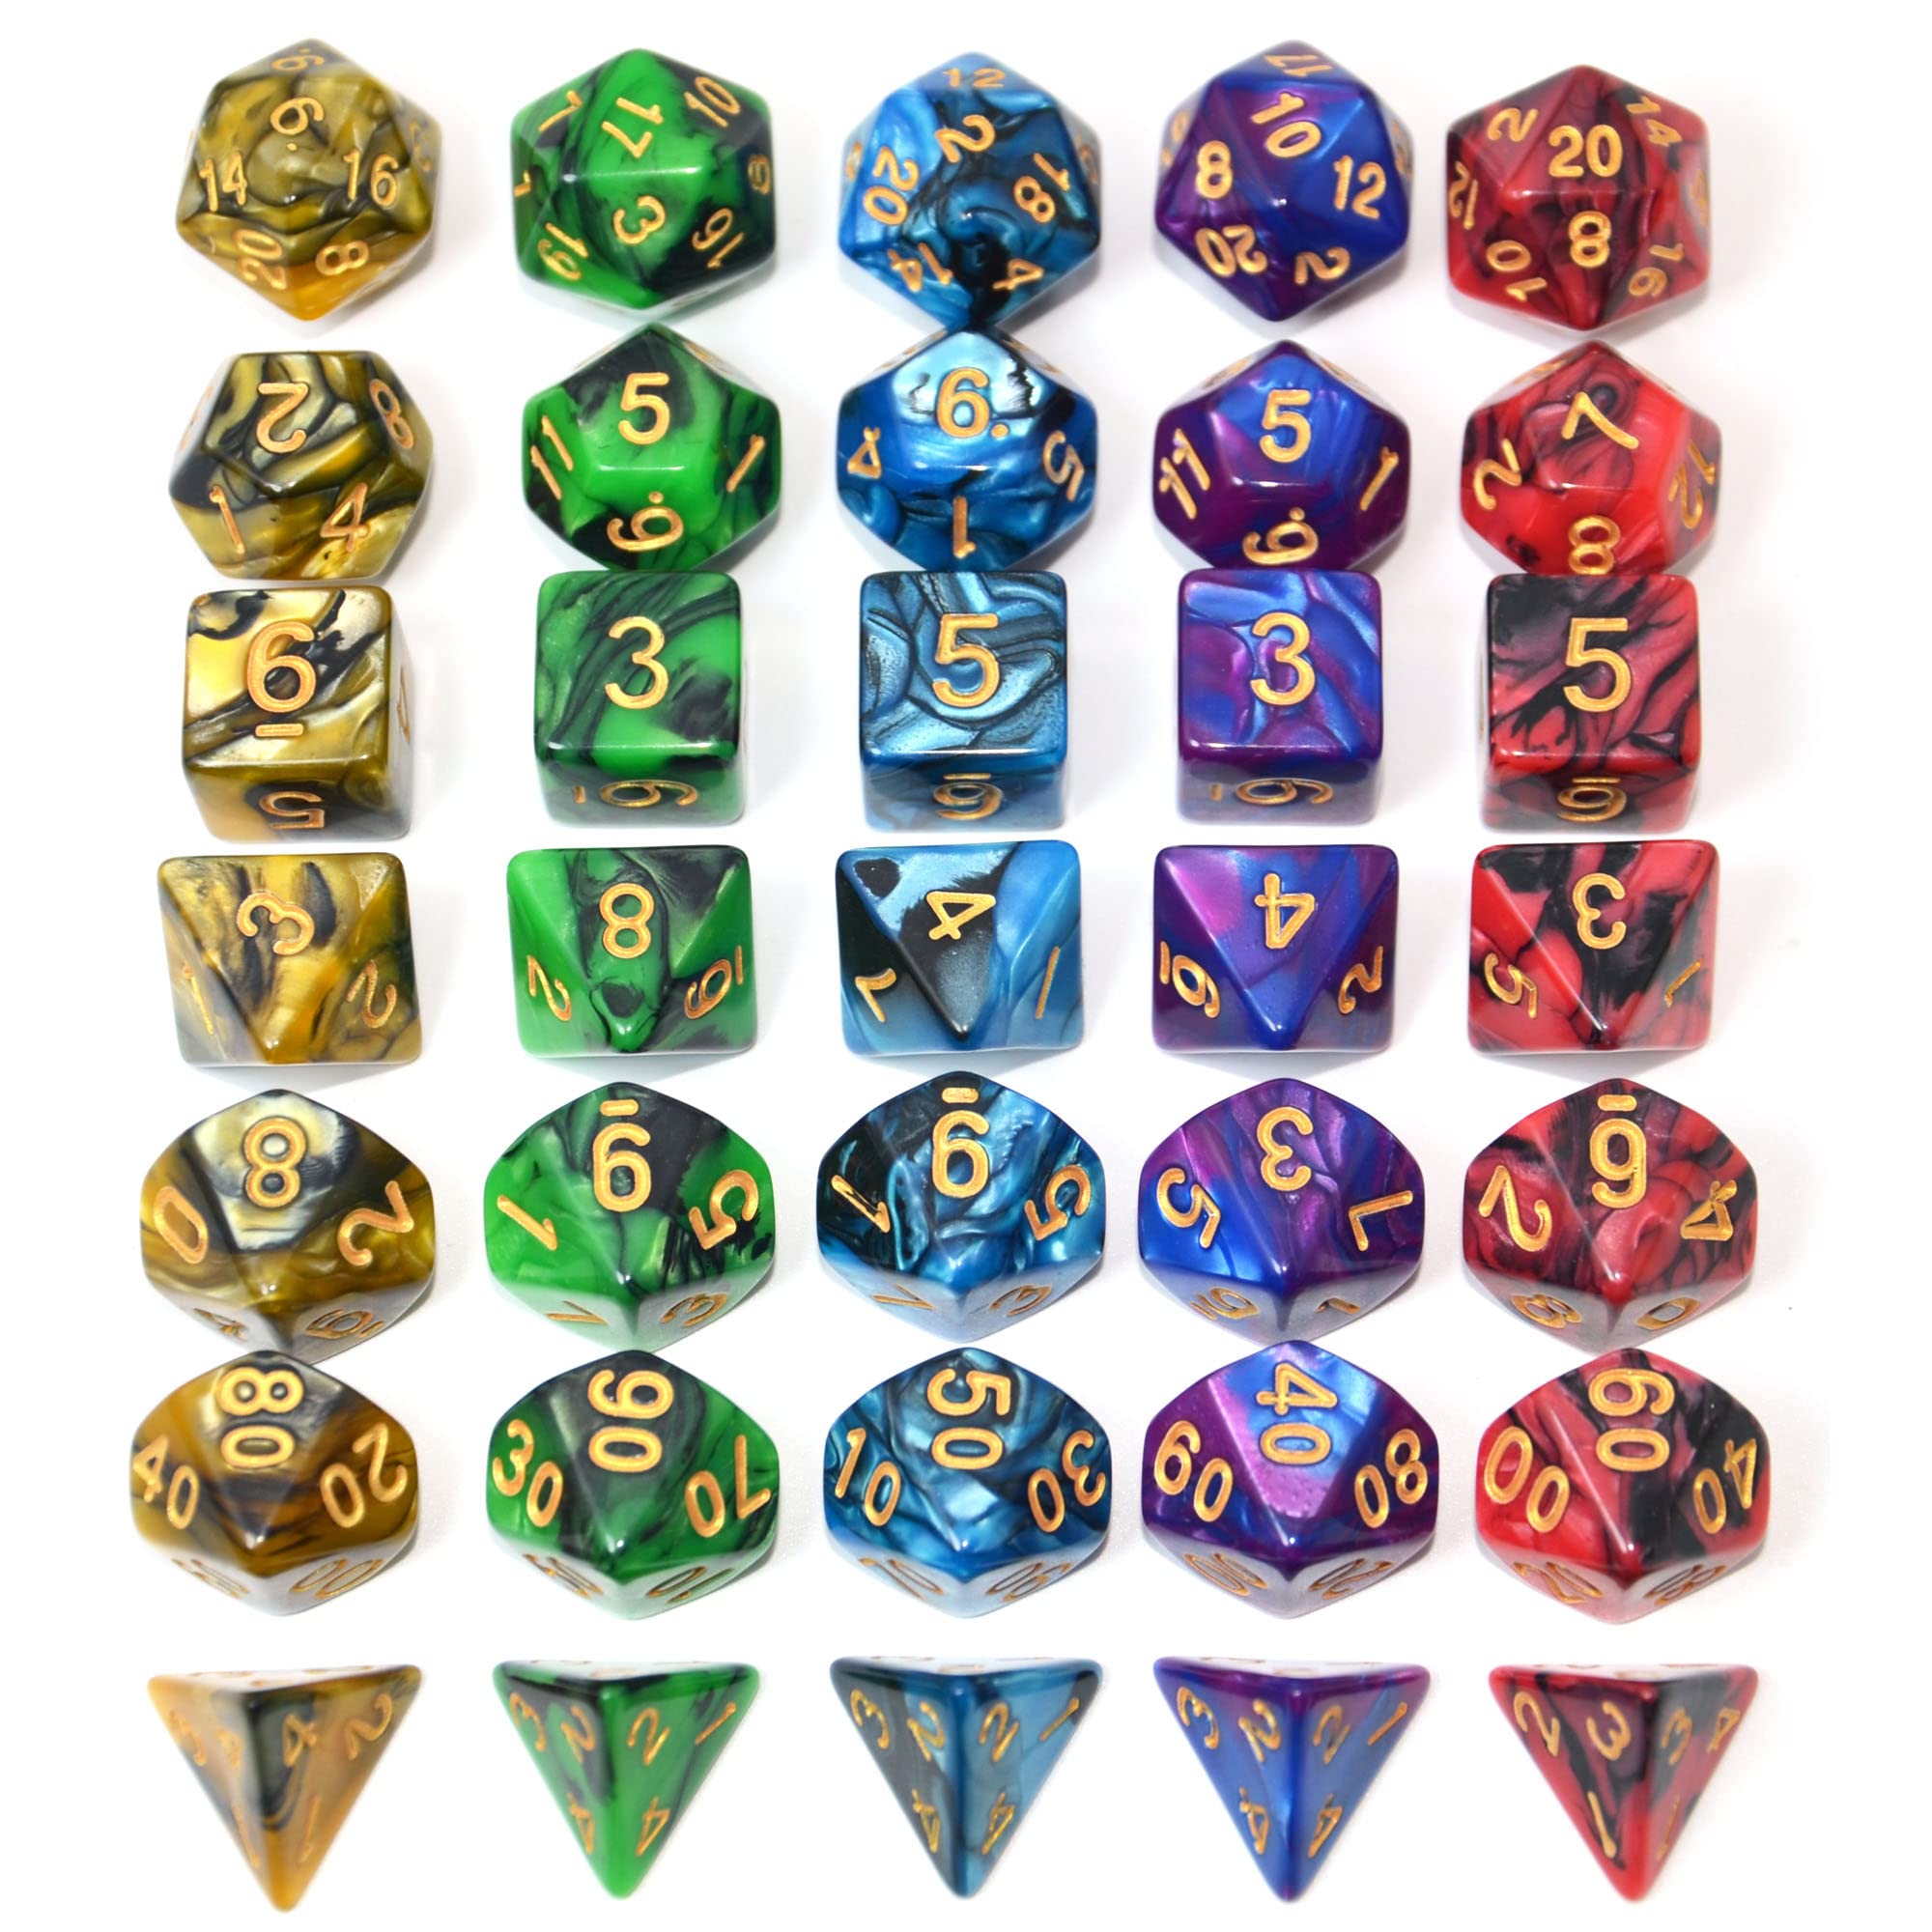 SmartDealsPro 5 x 7-Die Double-Colors Polyhedral Dice Sets with Pouches for D&D DND RPG MTG Dungeon and Dragons Table Board Roll Playing Games D4 D6 D8 D10 D% D12 D20